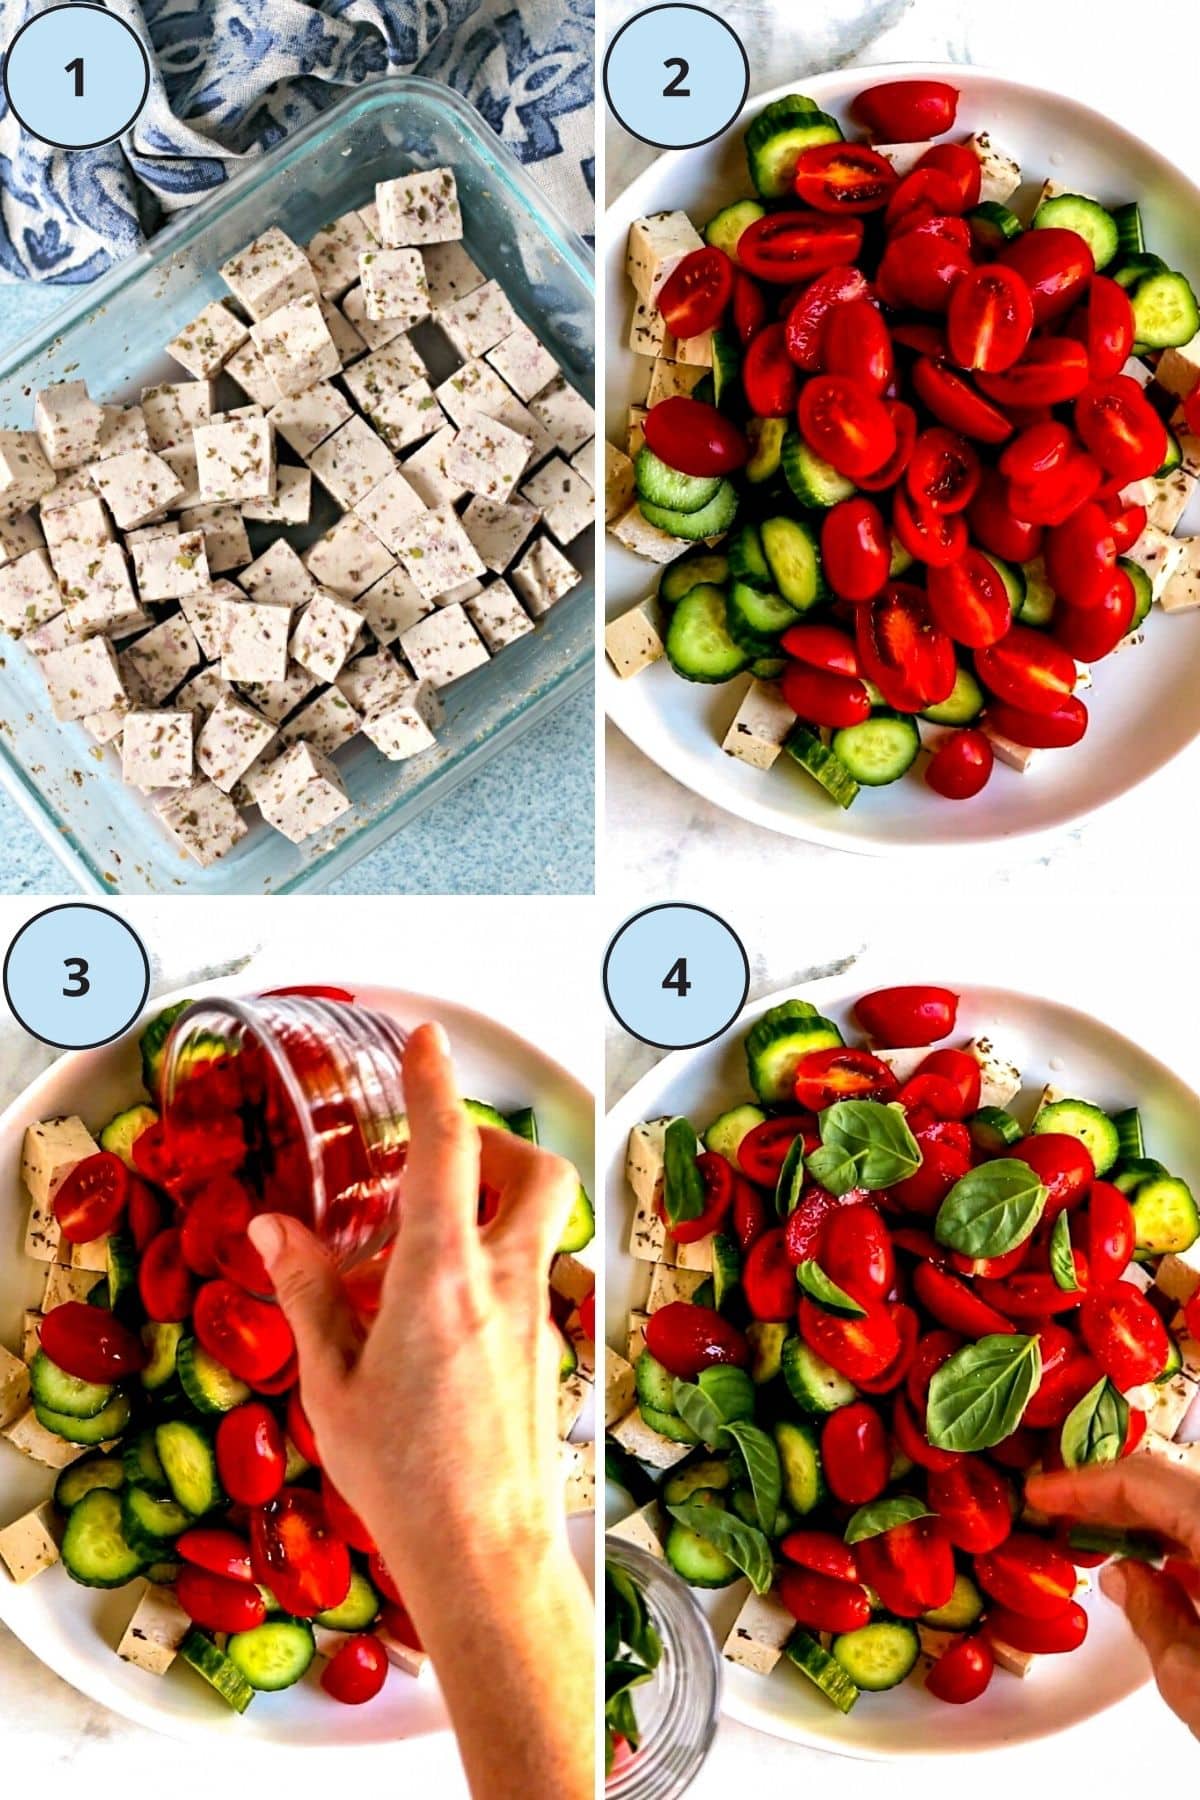 Collage of 4 numbered images showing the steps for making this recipe